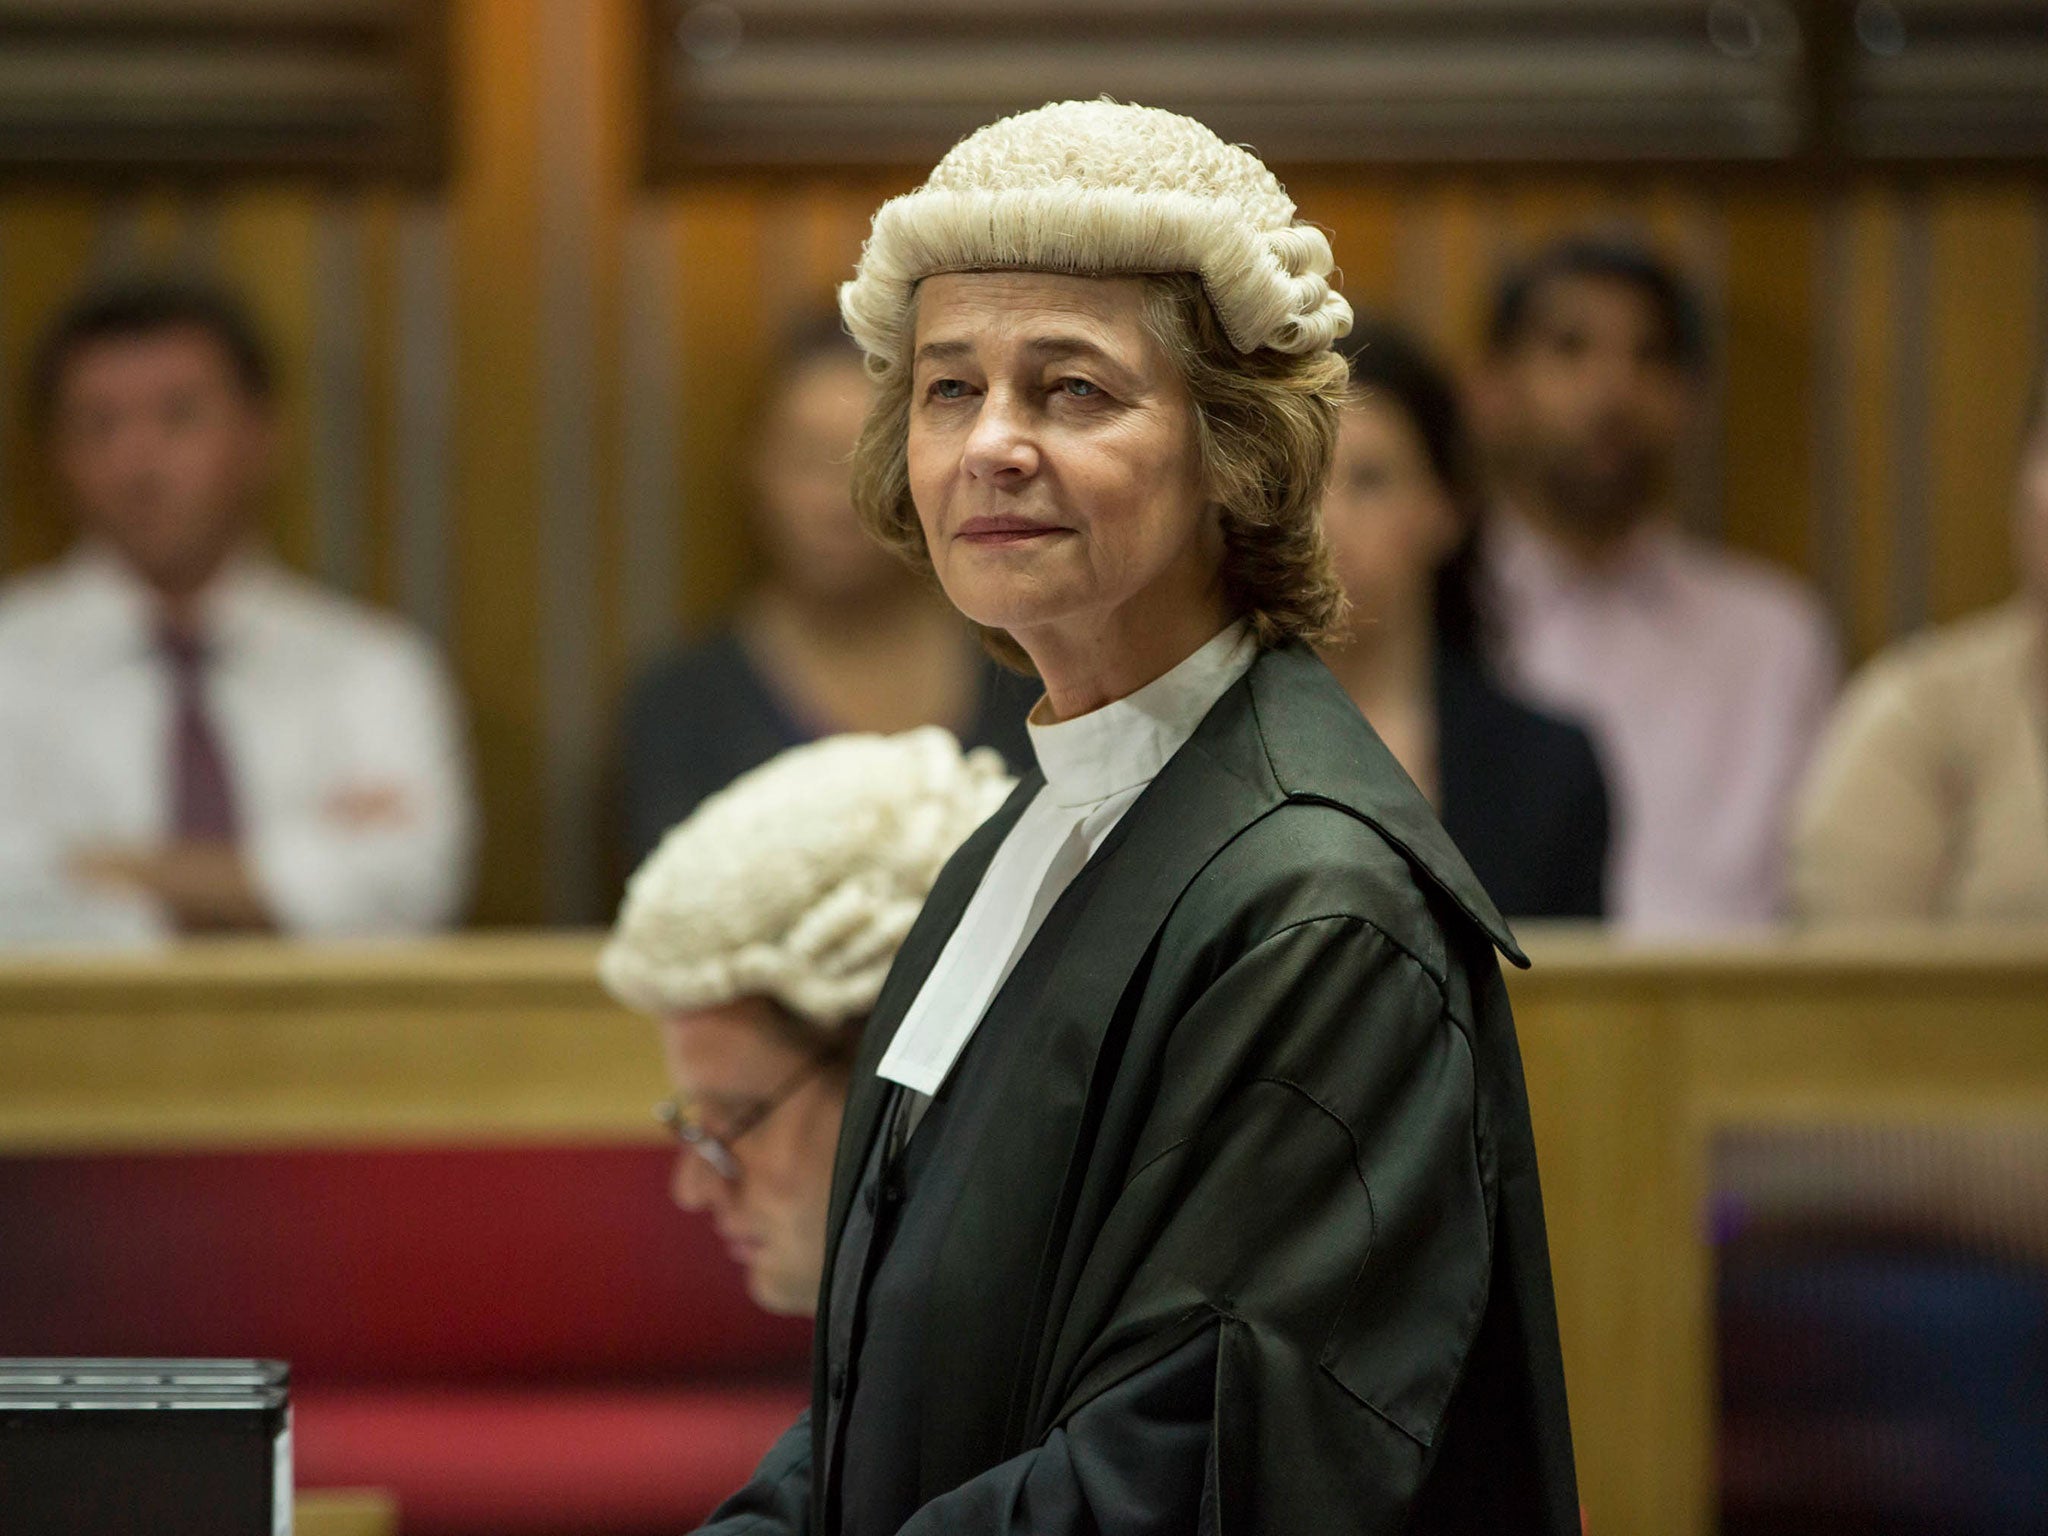 Real-world legal proceedings are rarely as lively as series two of Broadchurch would have us believe